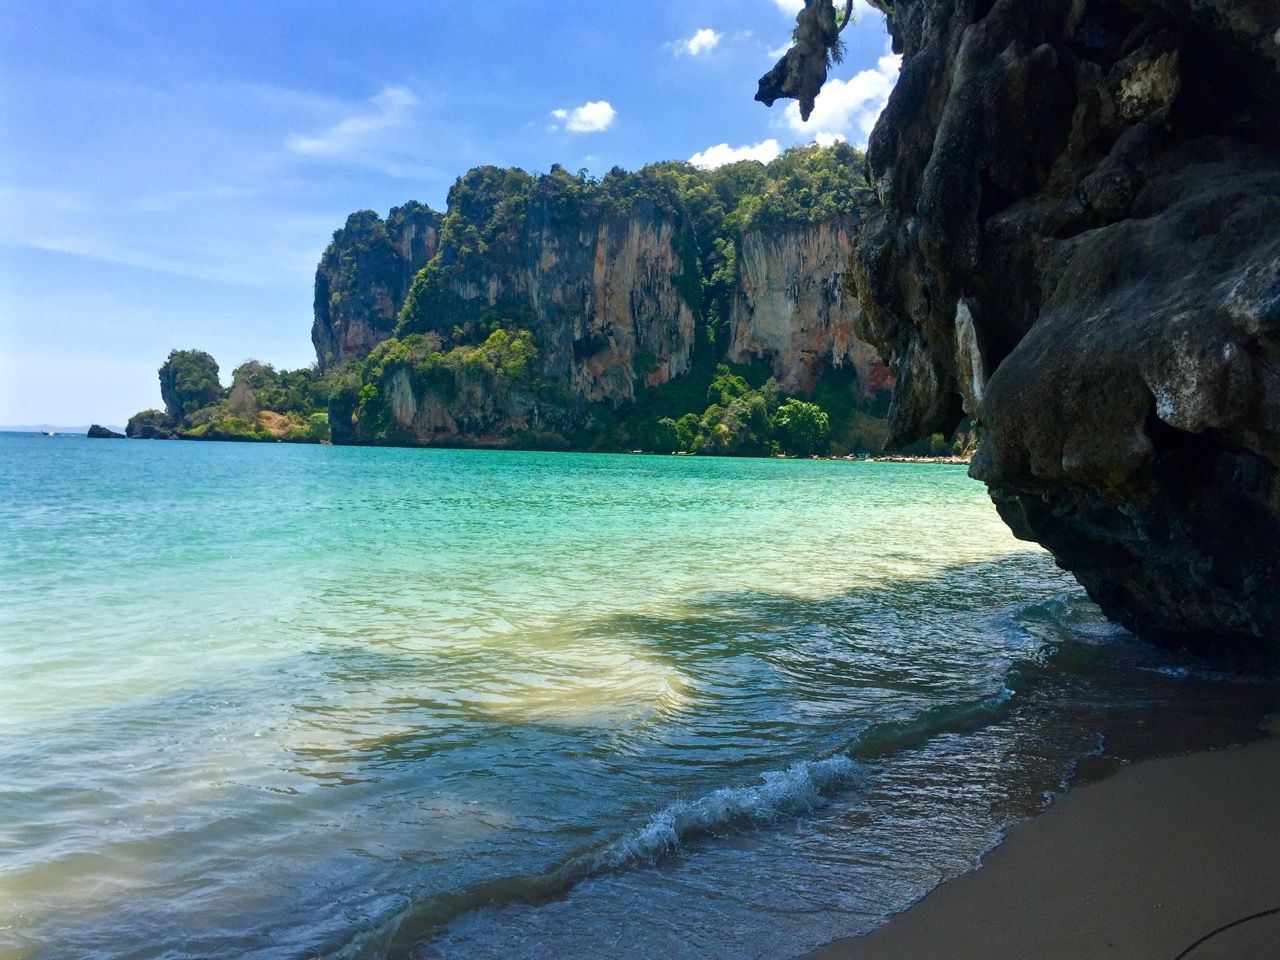 View of Tonsai beach from under the cliff.